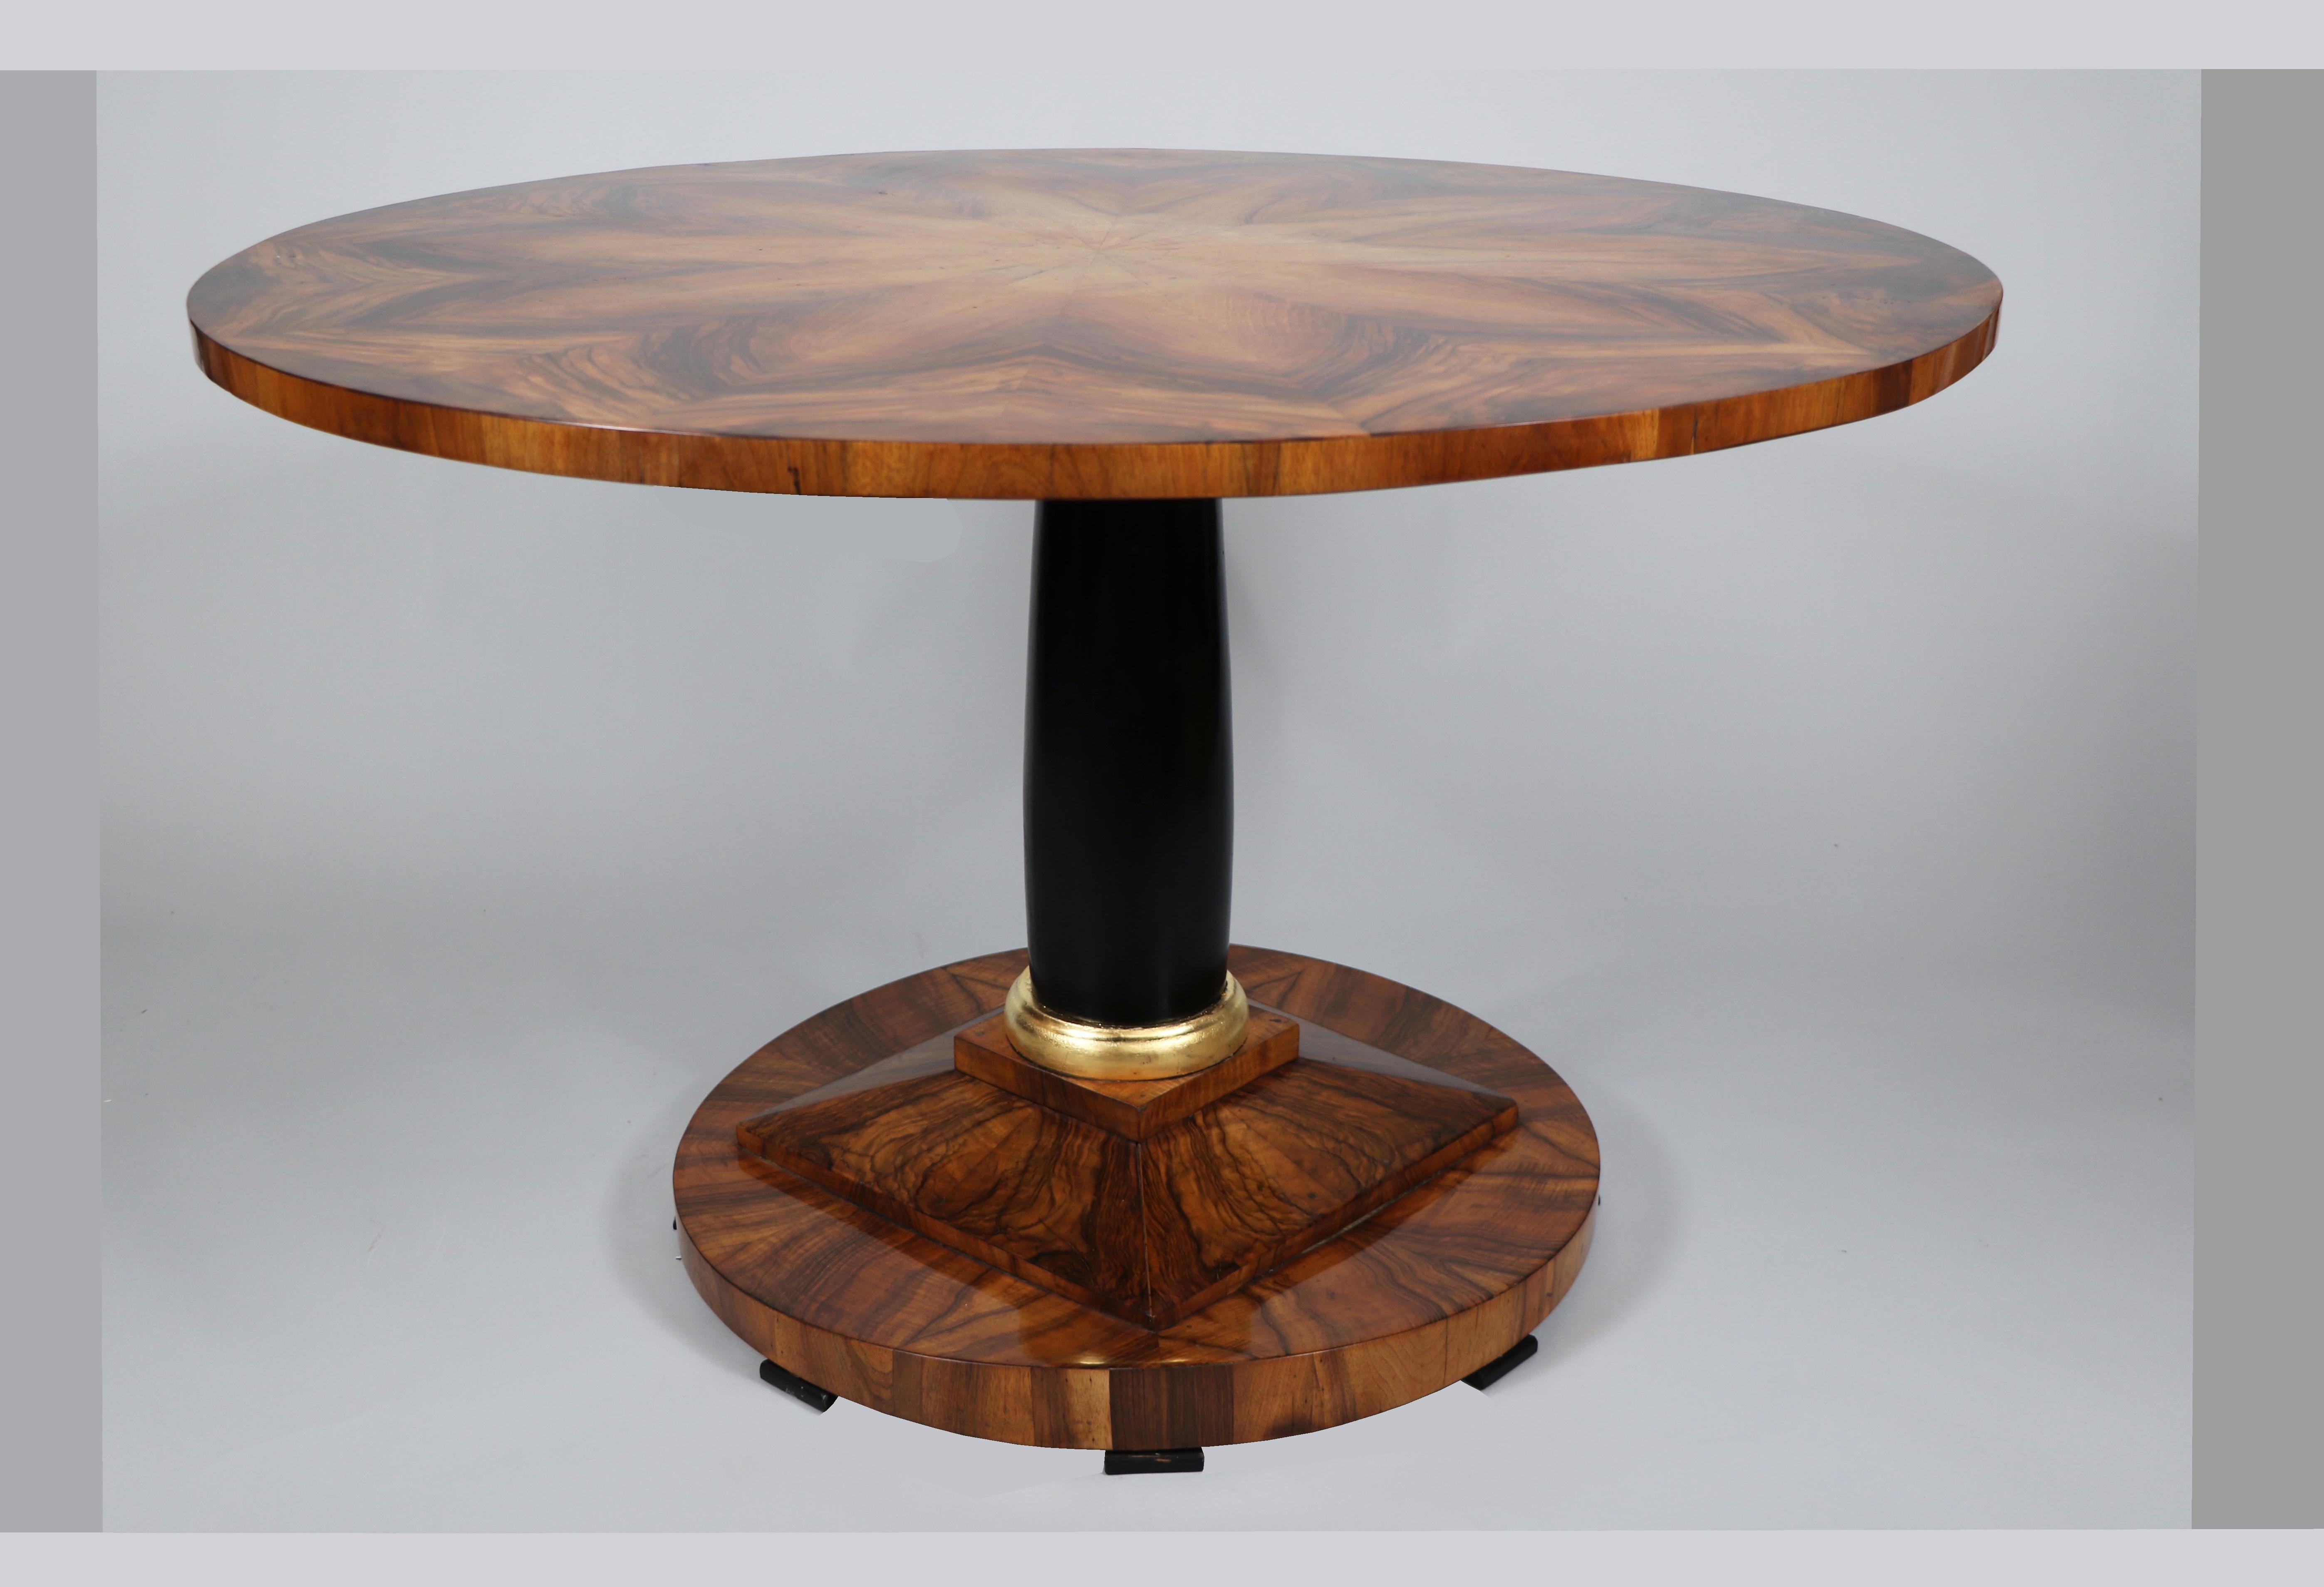 Hello,
This elegant and large Biedermeier walnut pedestal table is the best example of top-quality Viennese piece from circa 1820-25.

Viennese Biedermeier is distinguished by their sophisticated proportions, rare and refined design and excellent